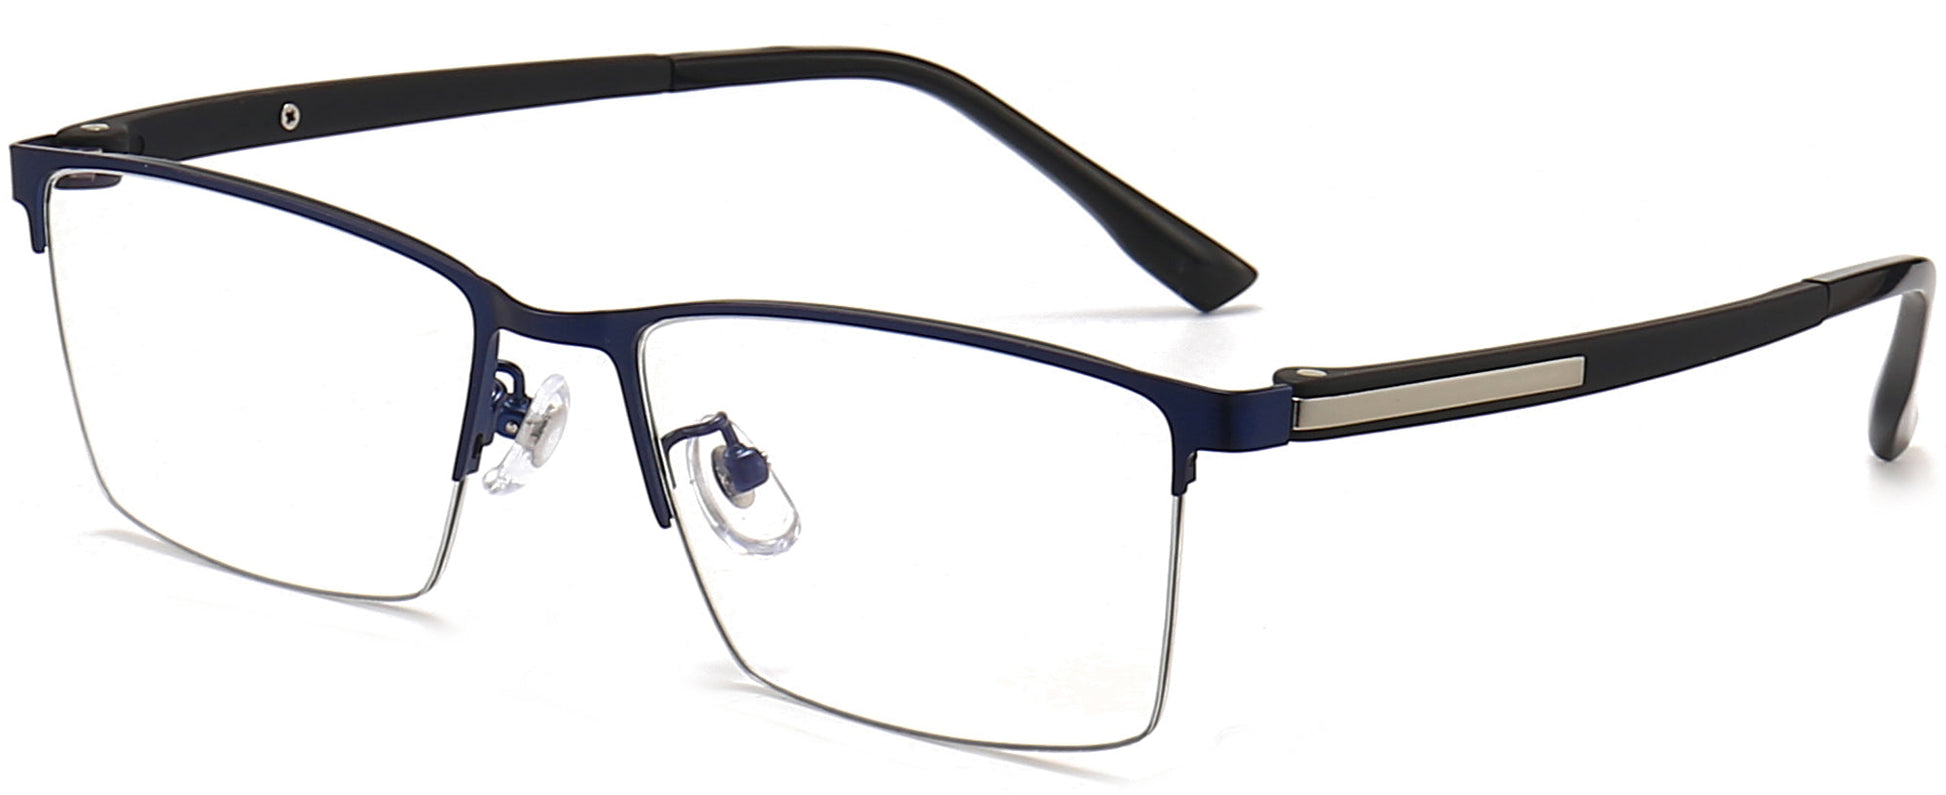 Philip Rectangle Blue Eyeglasses from ANRRI, angle view